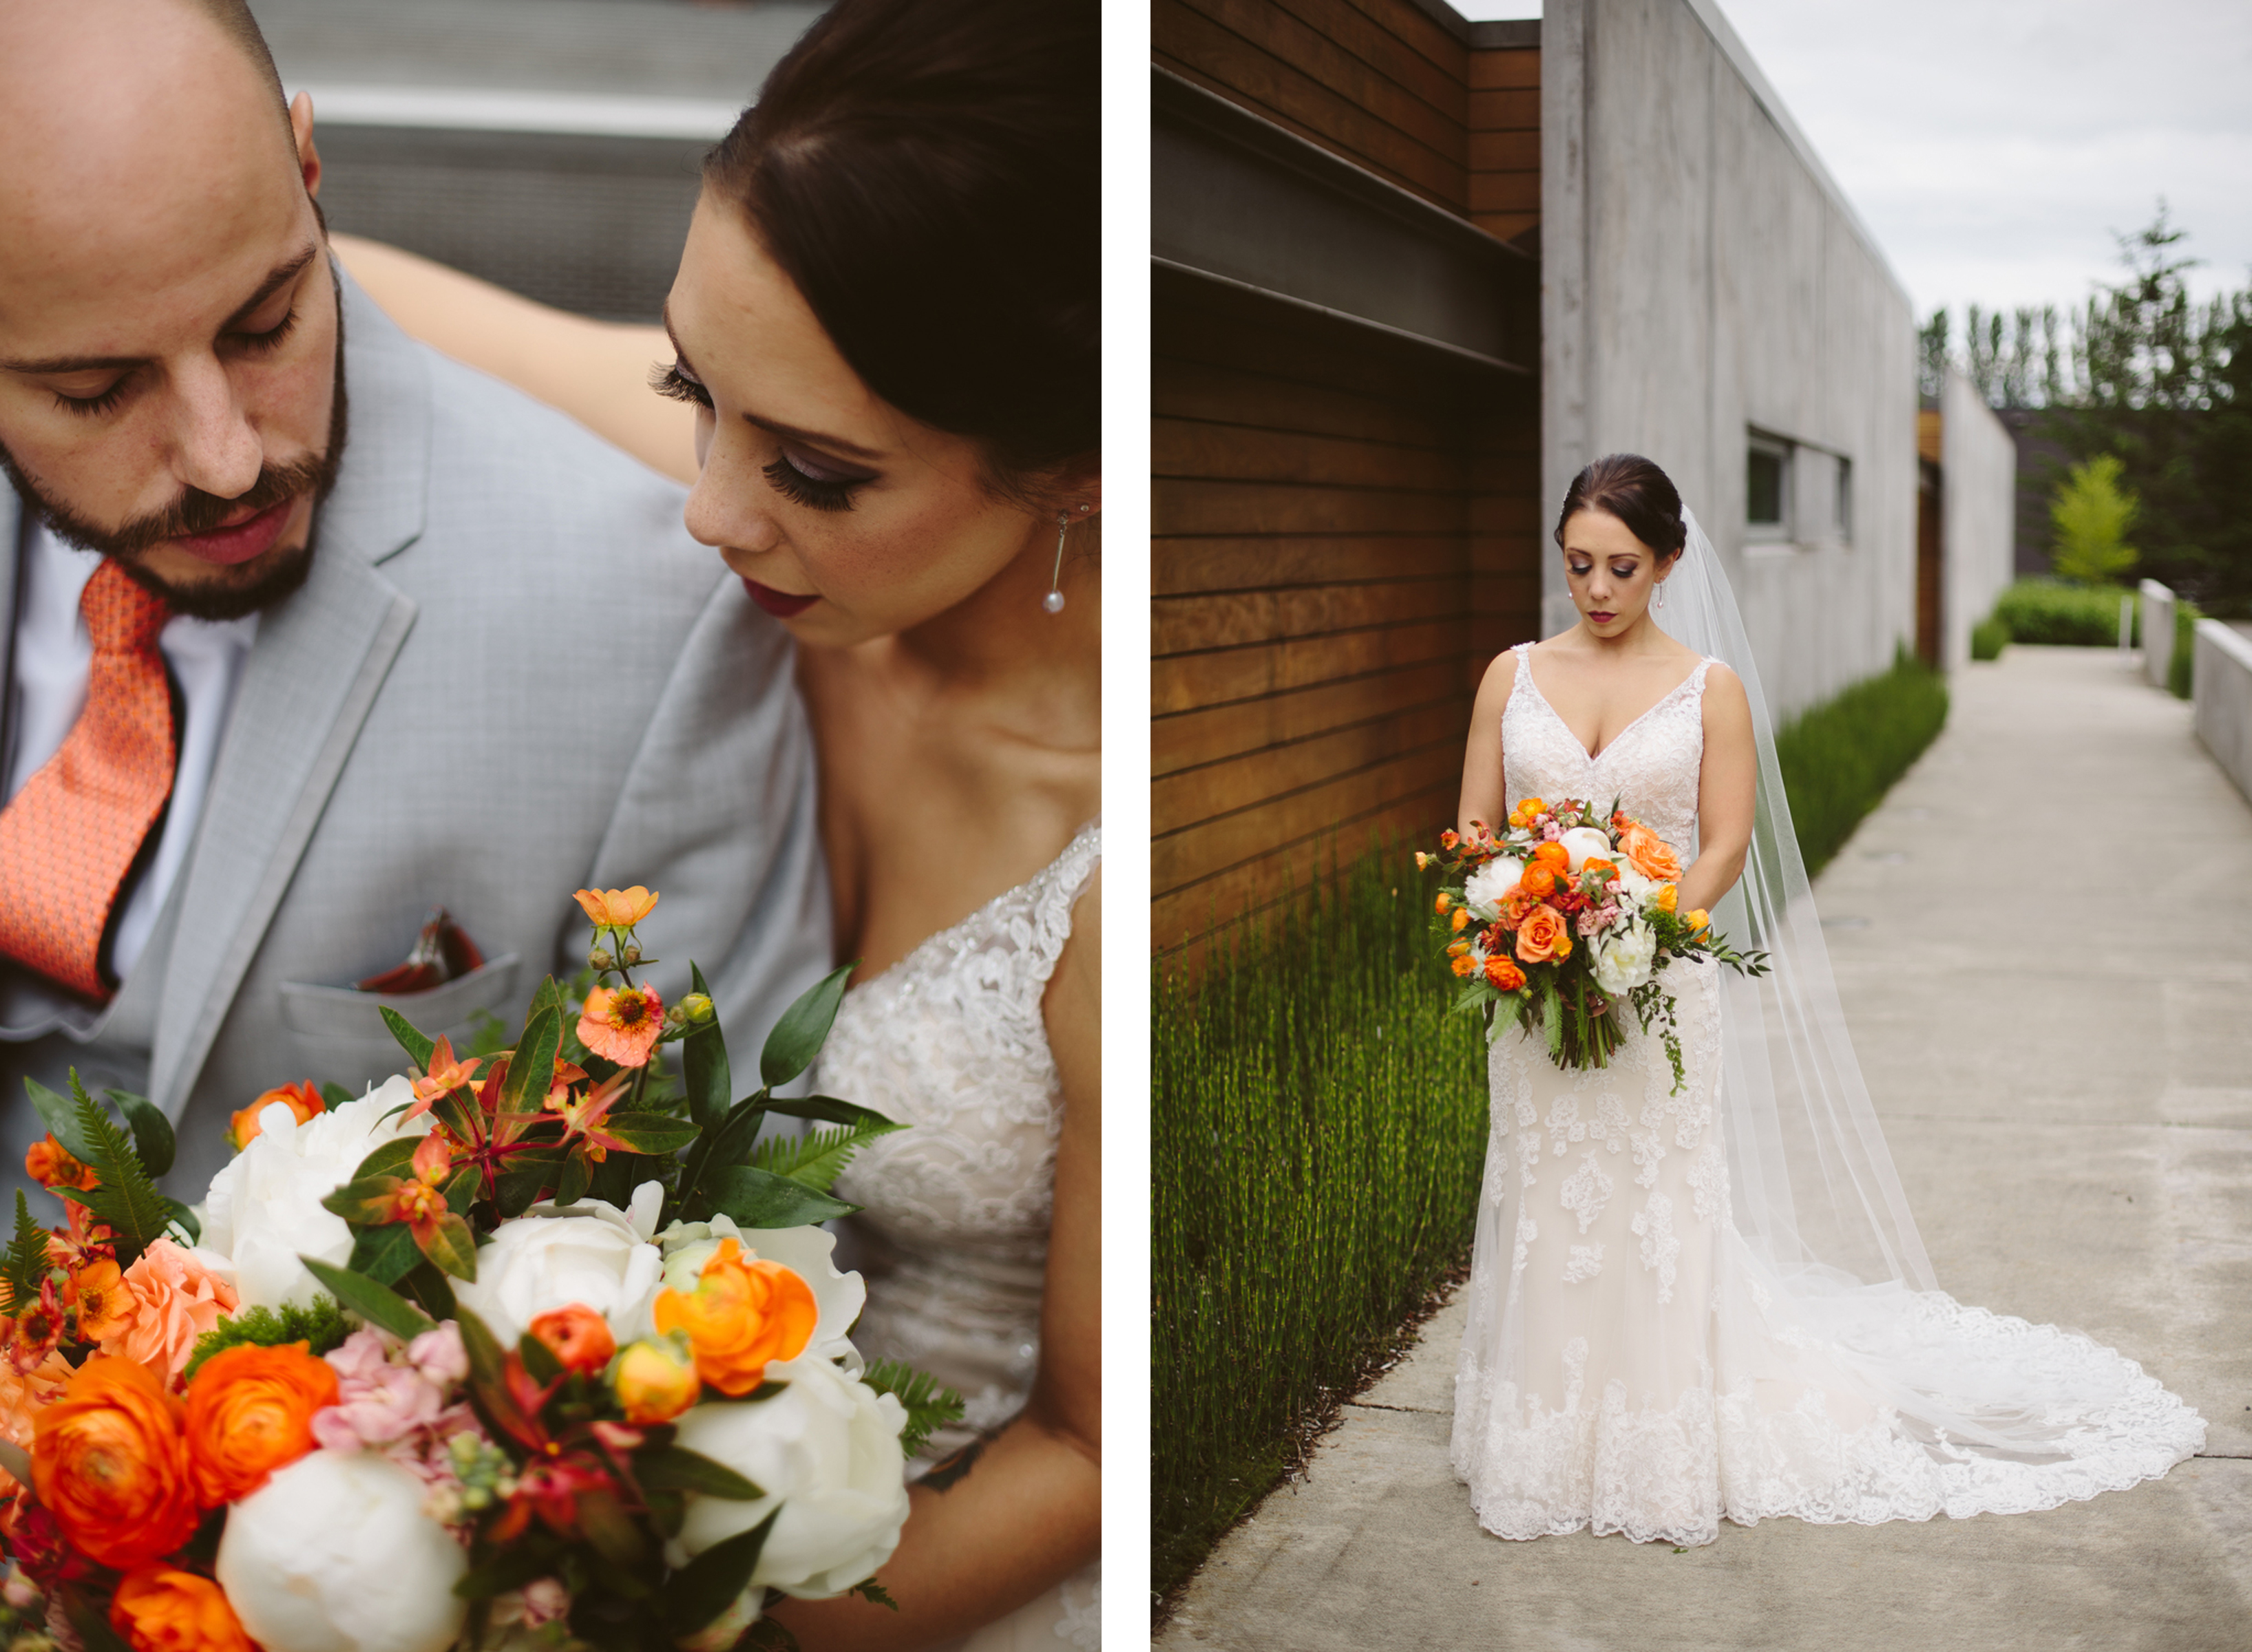 Photos by Seattle Wedding Planner